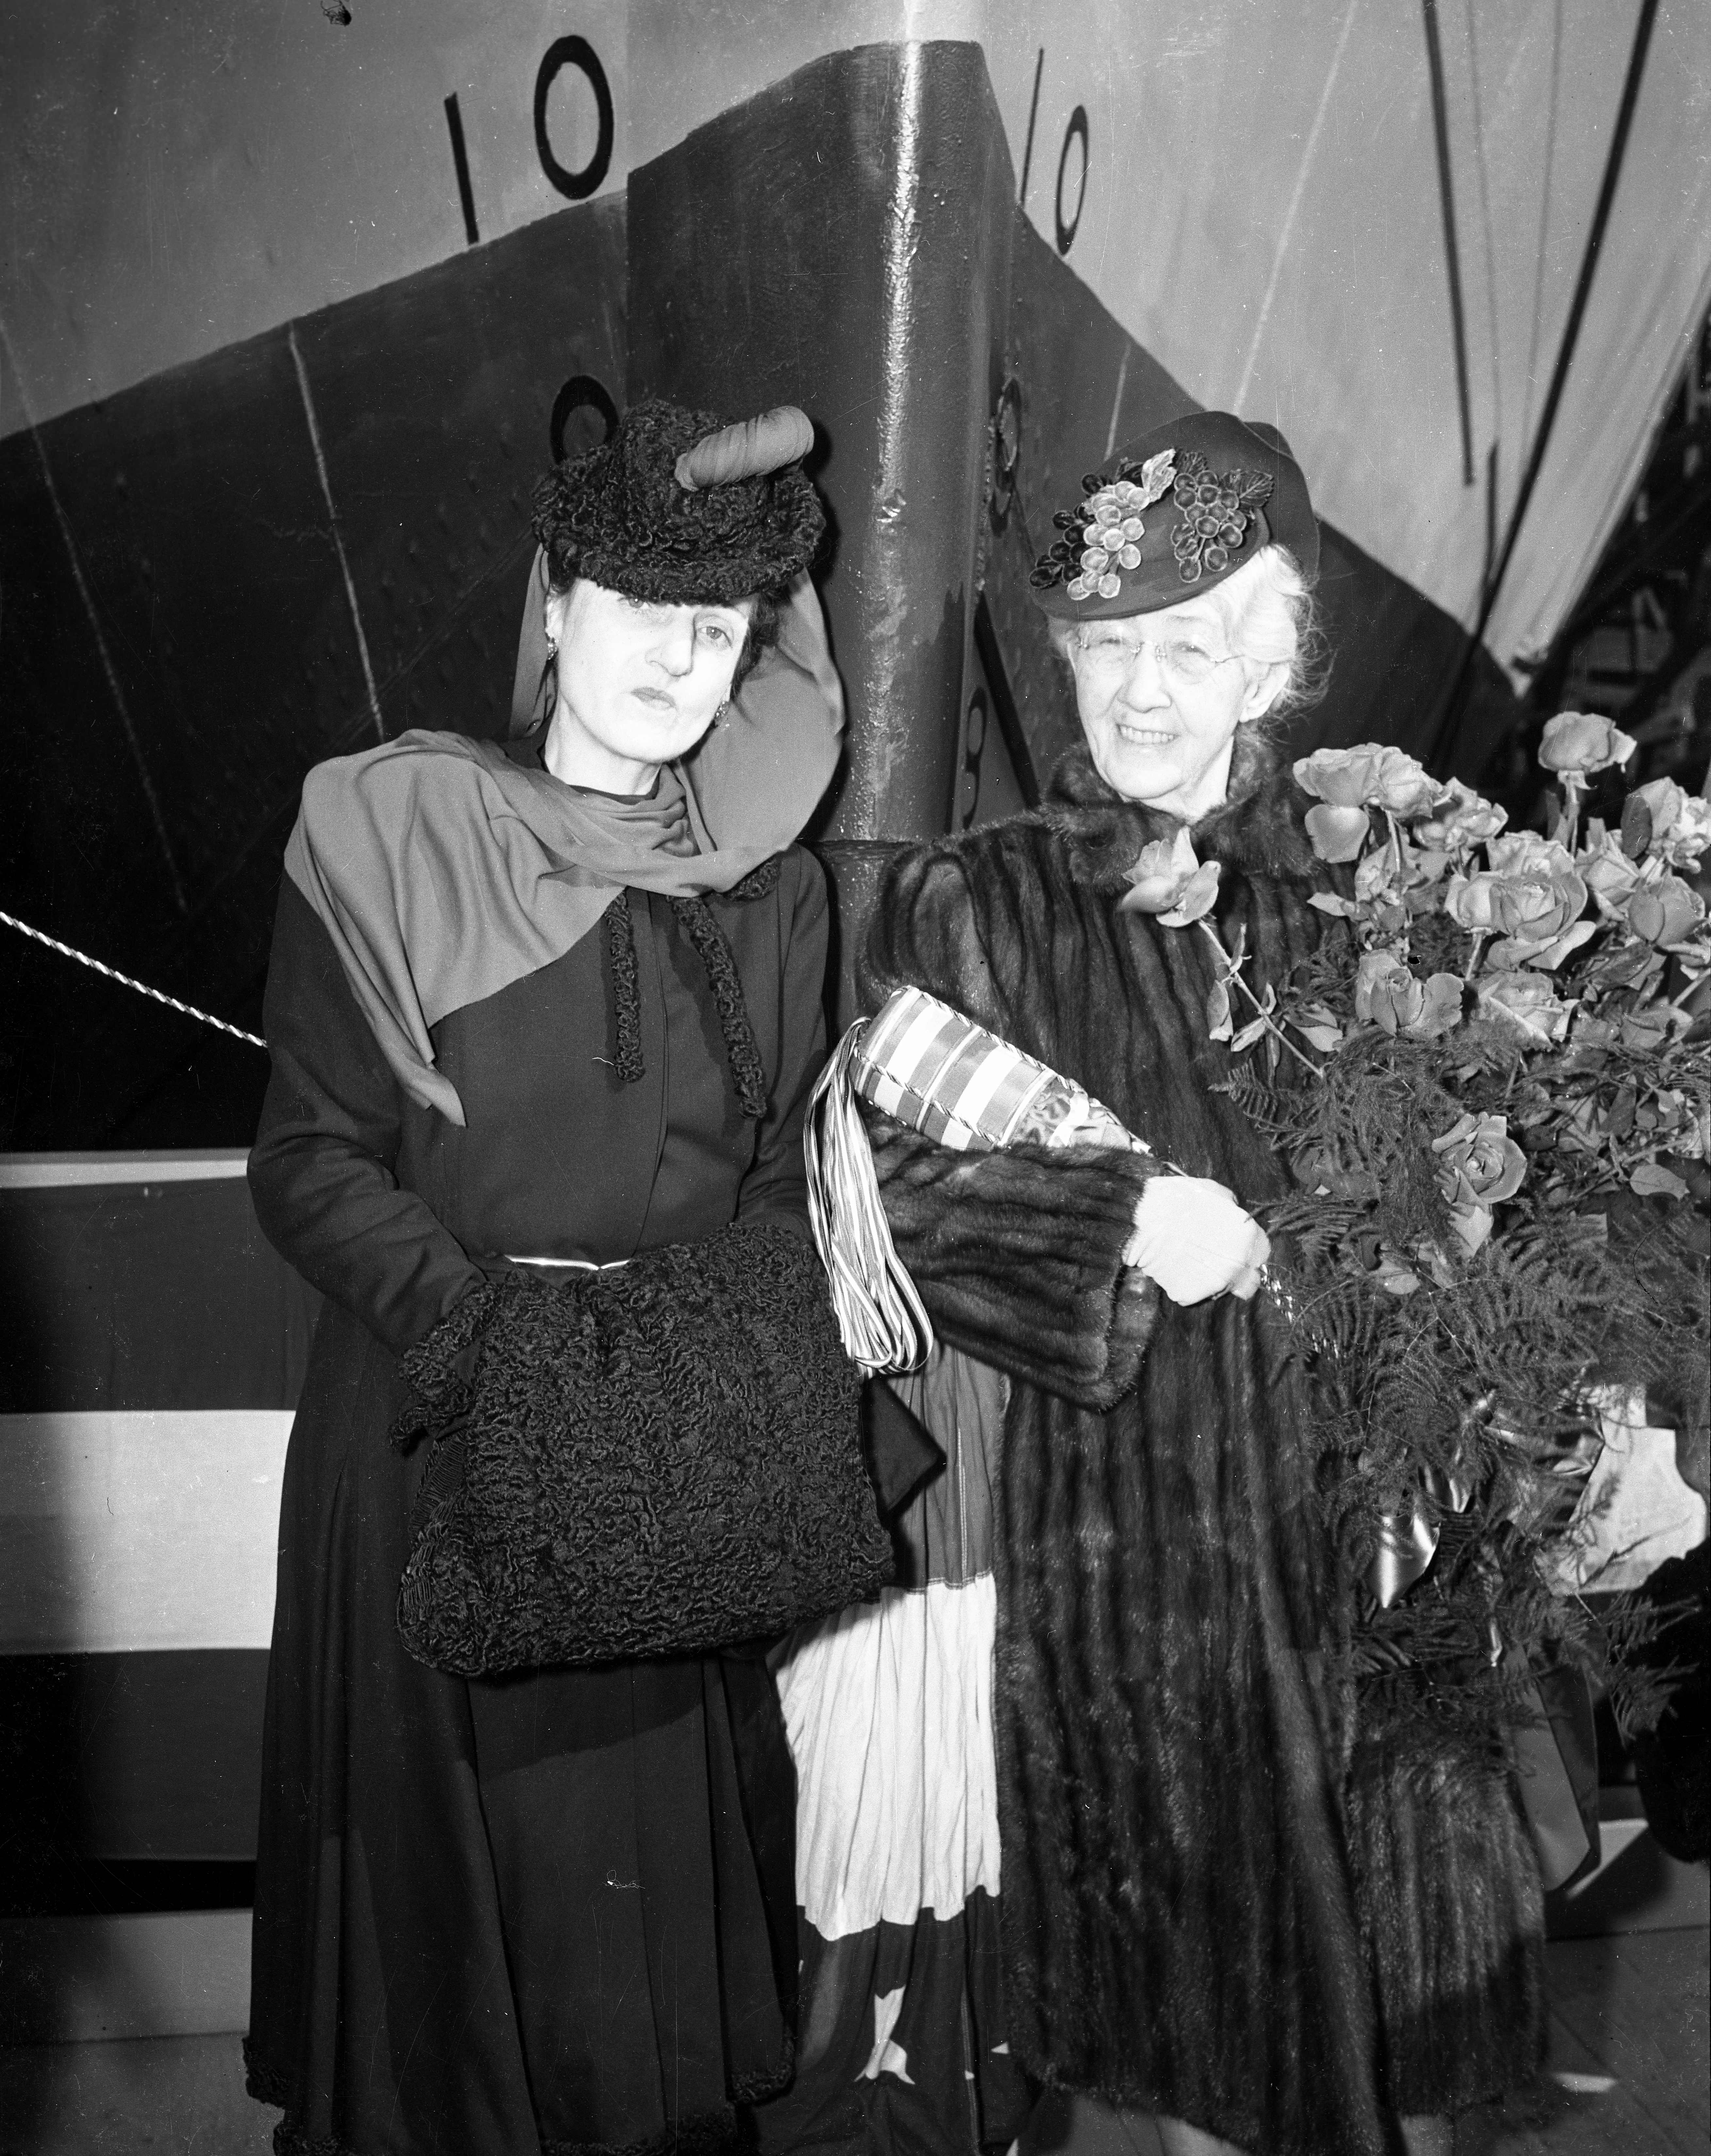 Posed portrait of two well-dressed women attending a ship launching. One is holding a ceremonial bottle and bouquet.